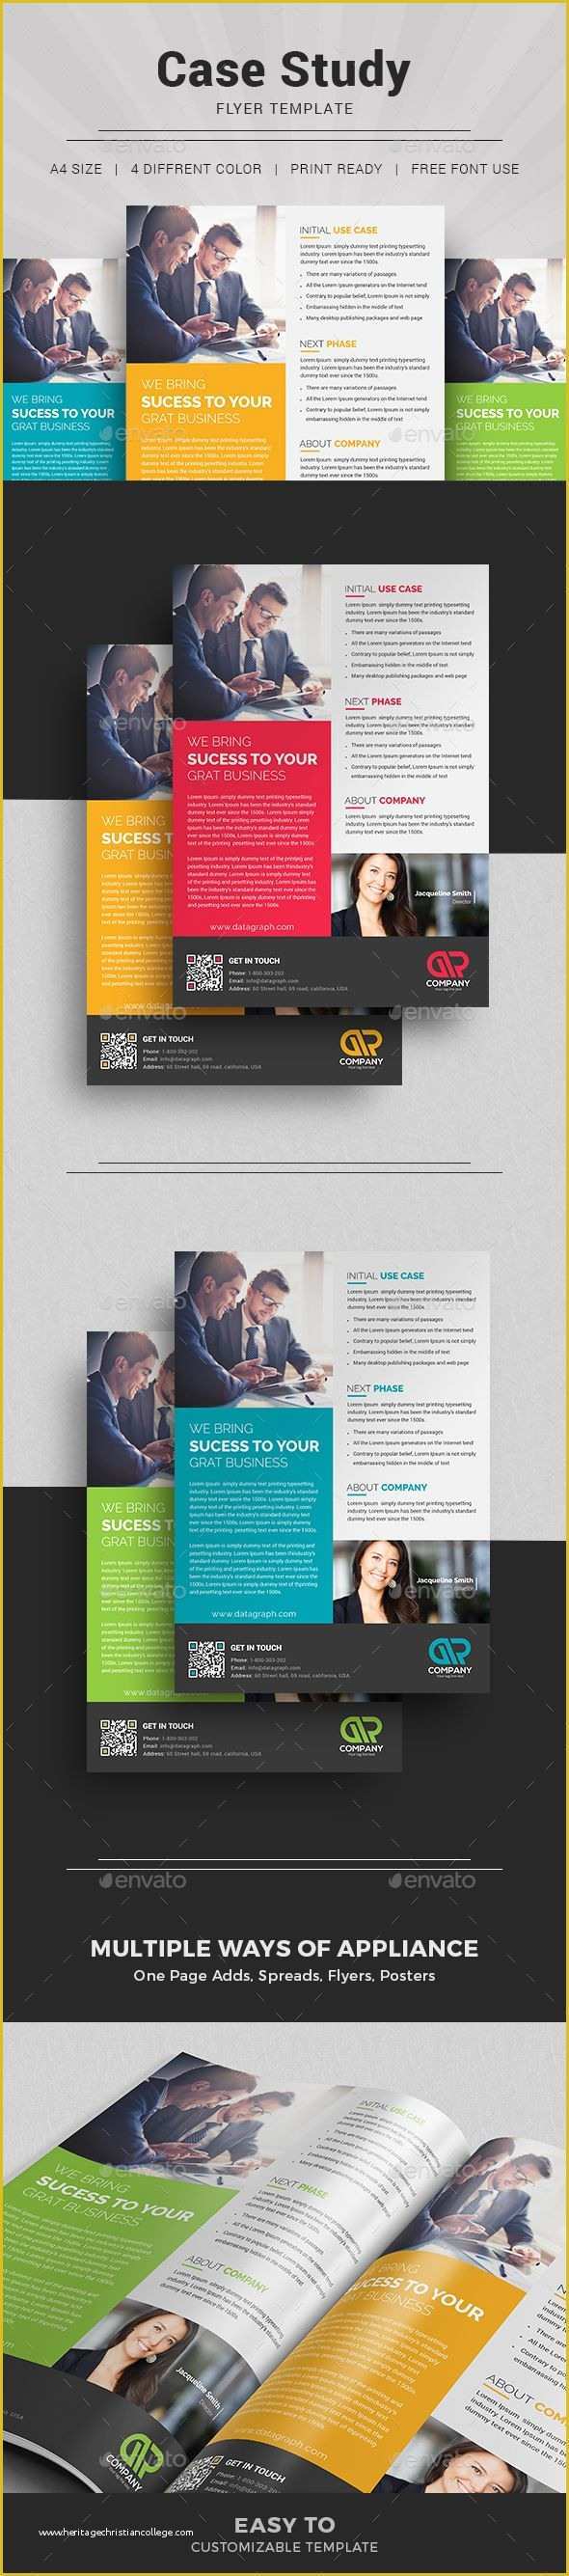 Case Study Templates Free Download Of Best 25 Case Study Ideas On Pinterest